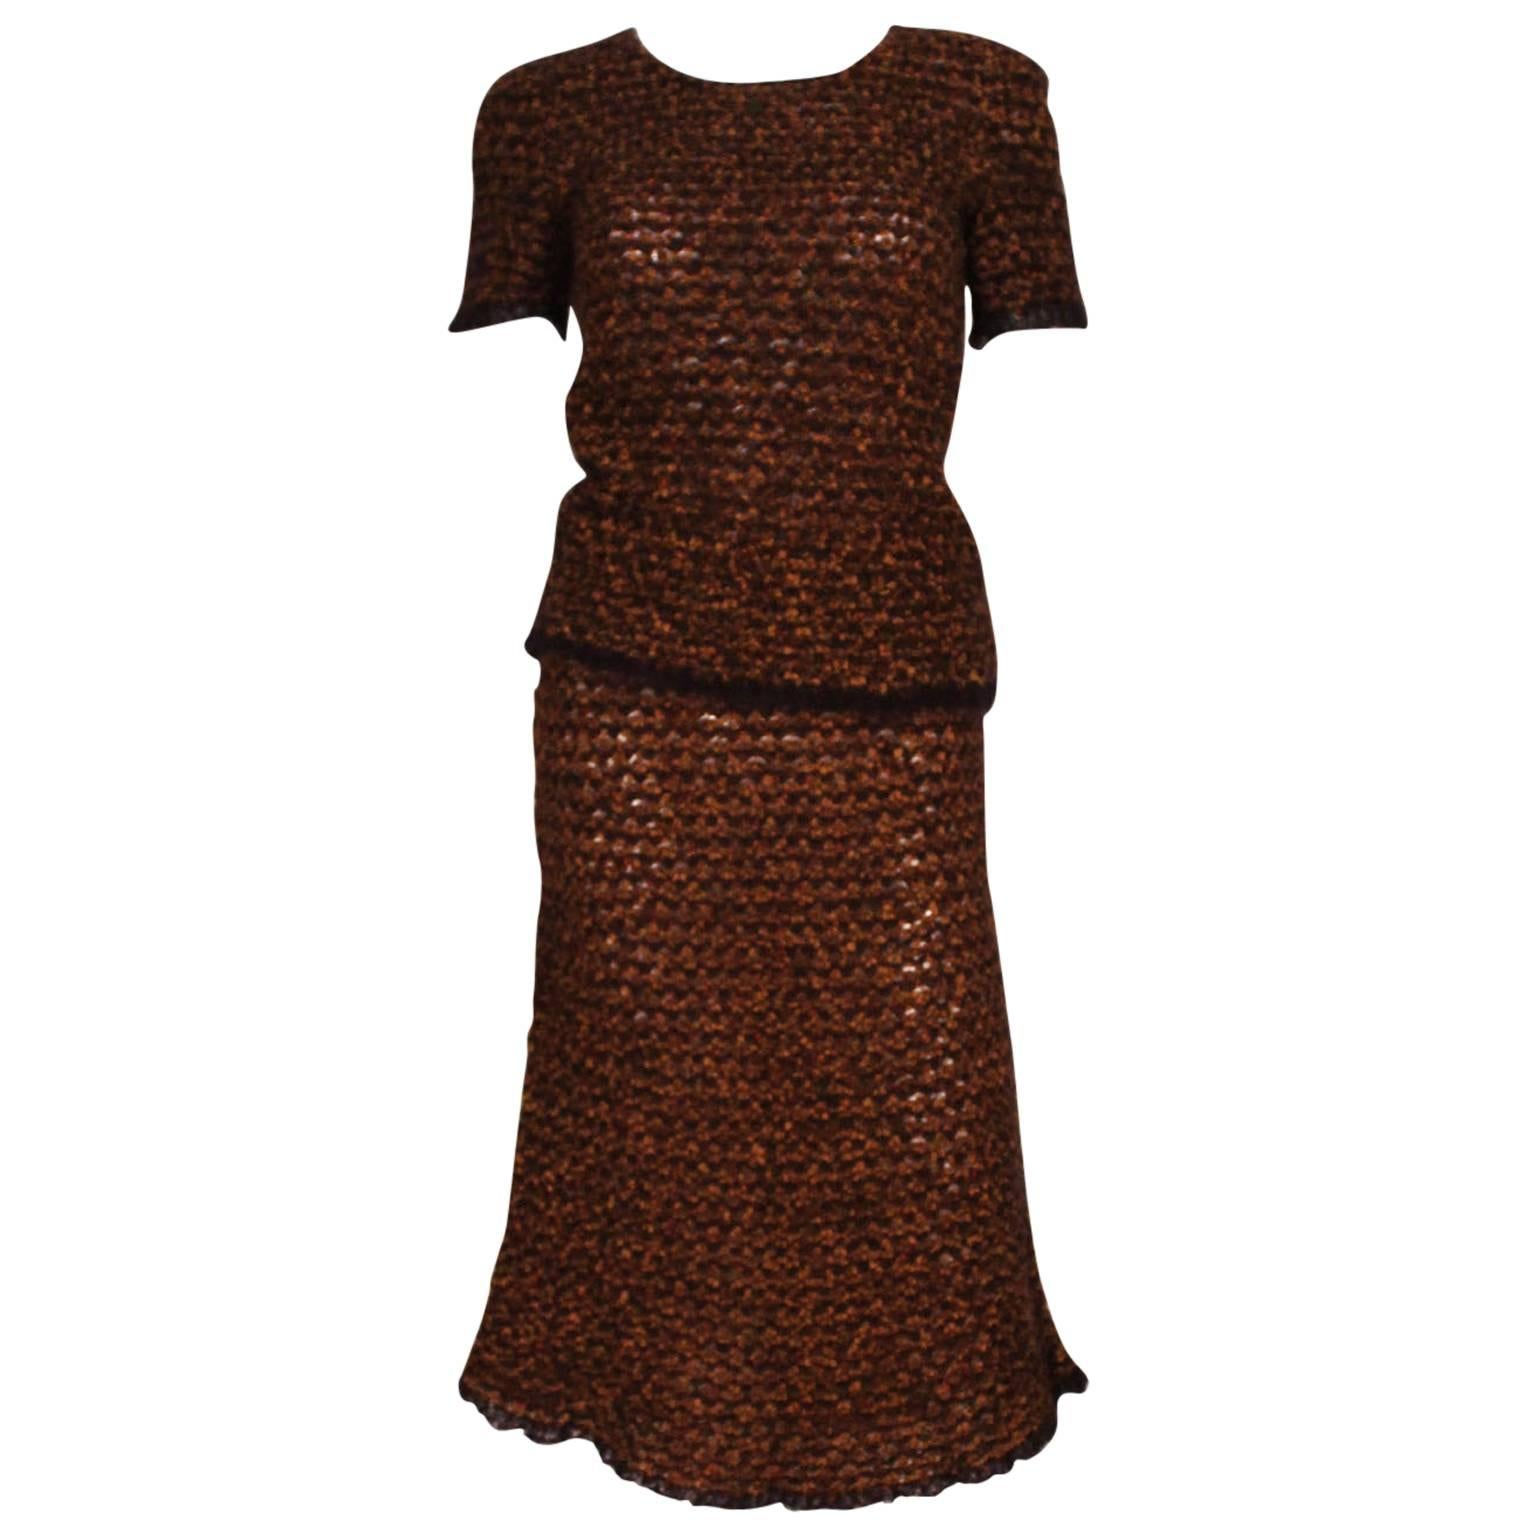 1990s Chanel Chestnut Tweed Look Knitted 2 Piece